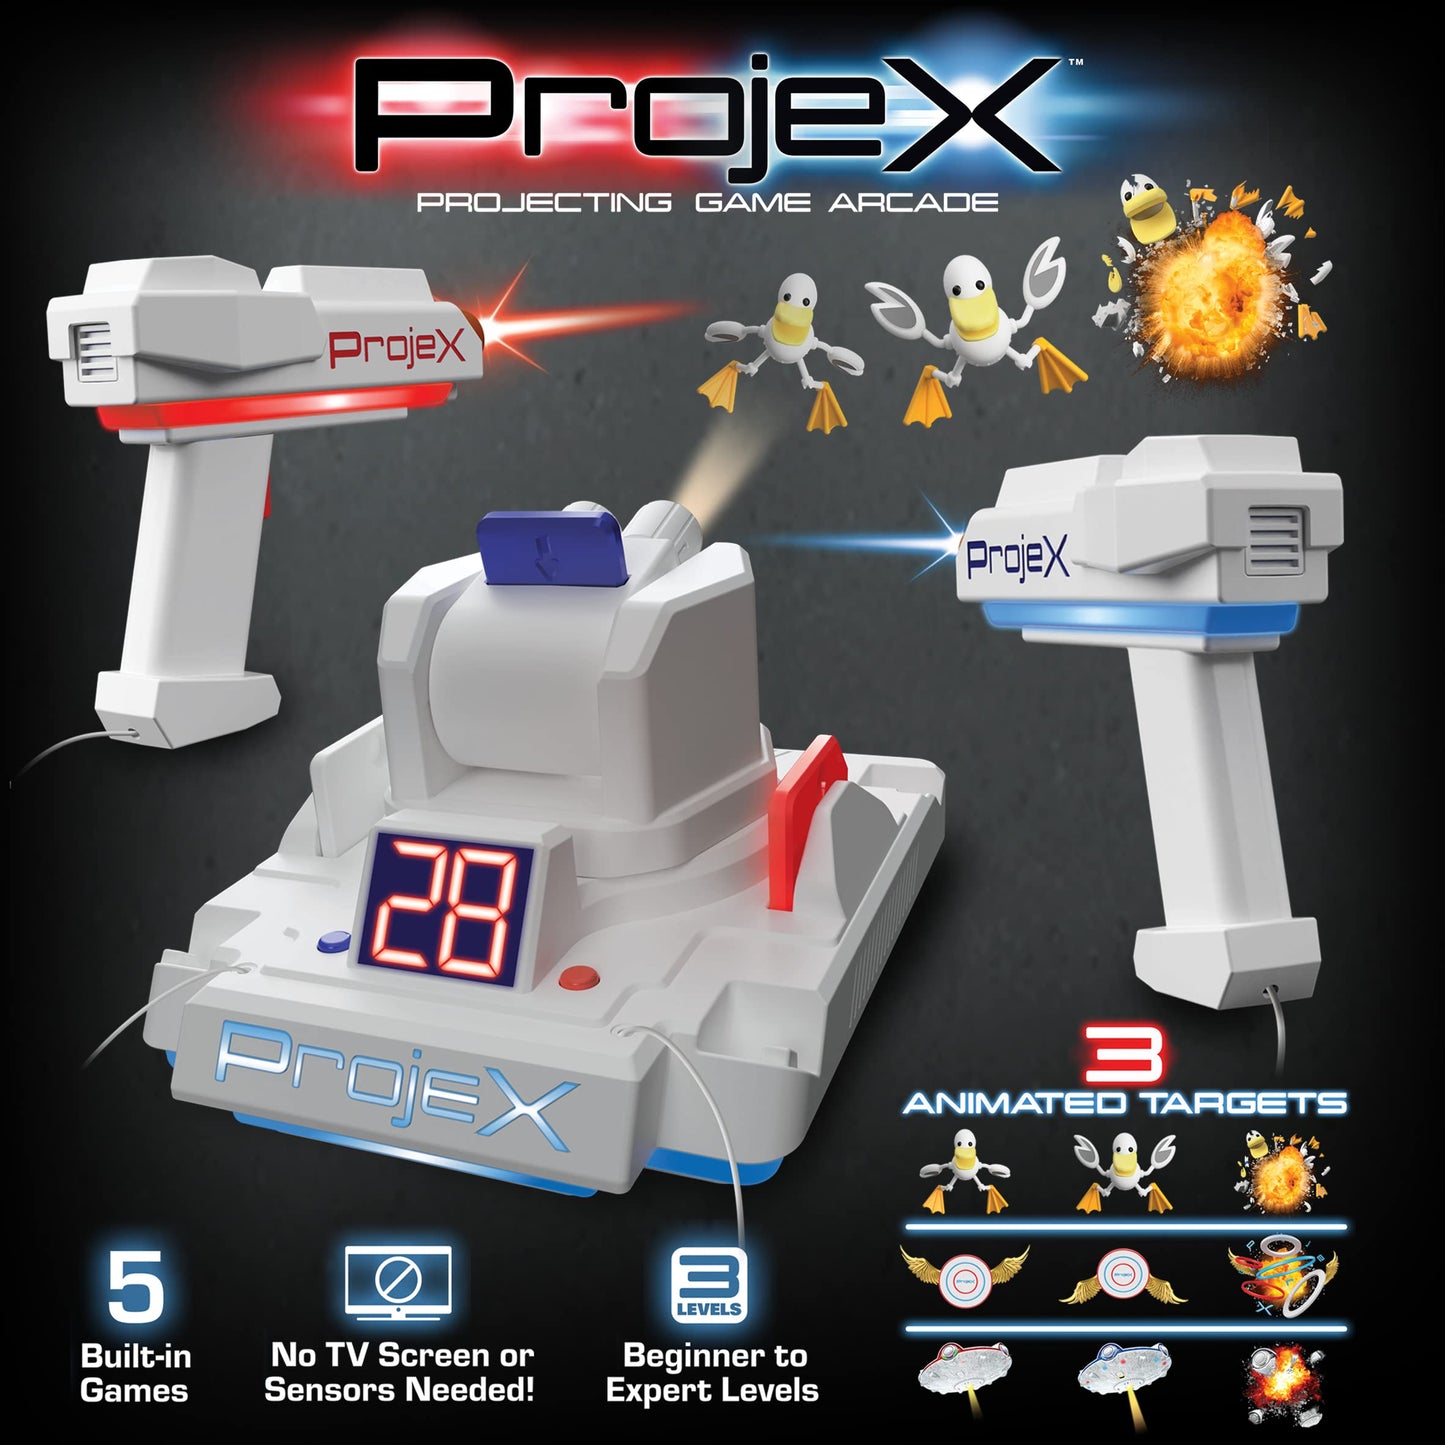 nsi international inc. Projex Projecting Arcade Game - Target Practise Game, Moving Targets, 3 Skill Levels, Party Toy